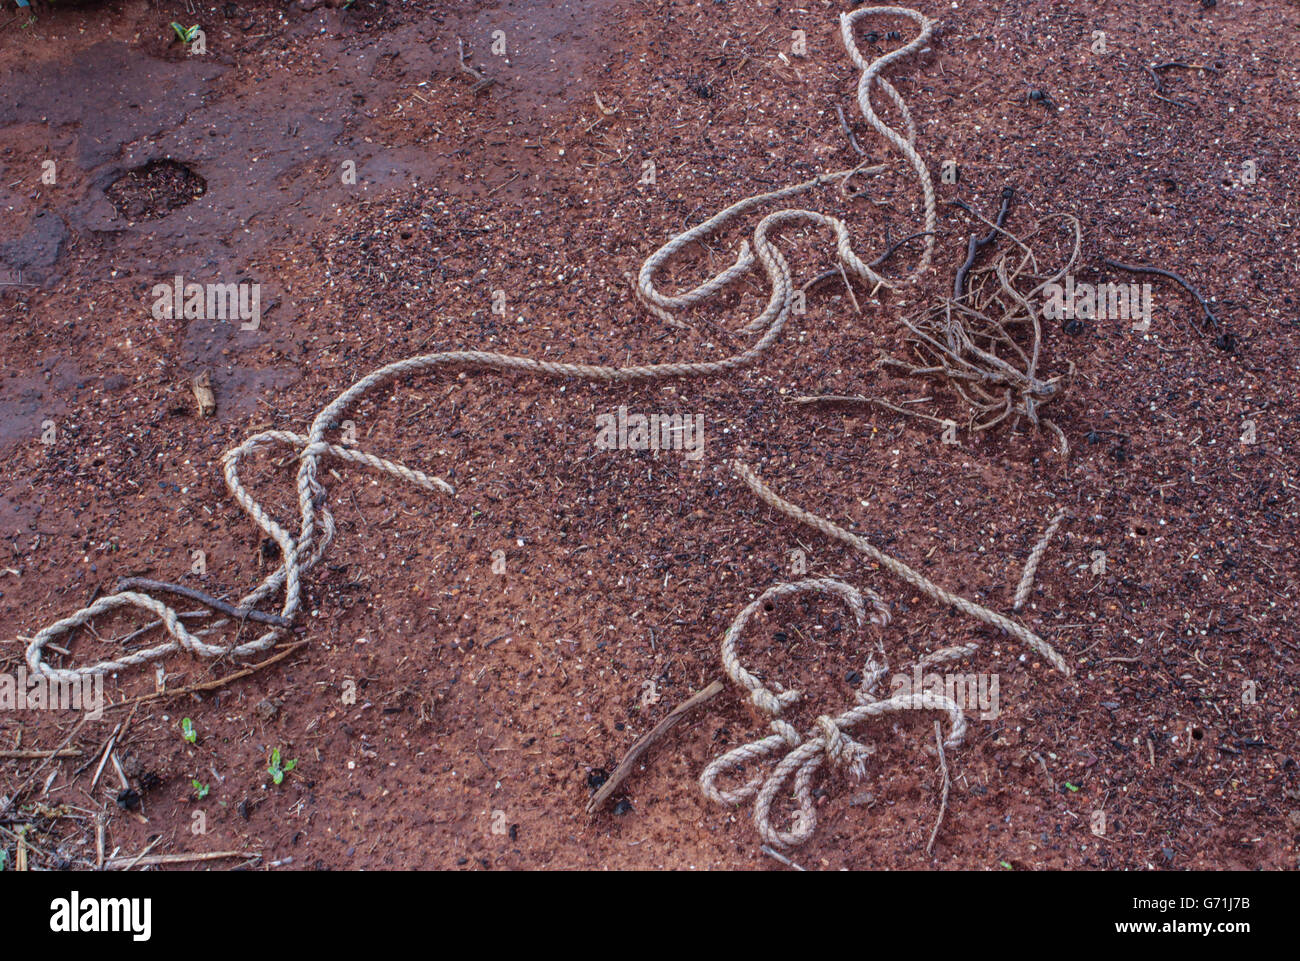 Outback Australia red dirt dried out with a rope through it Stock Photo